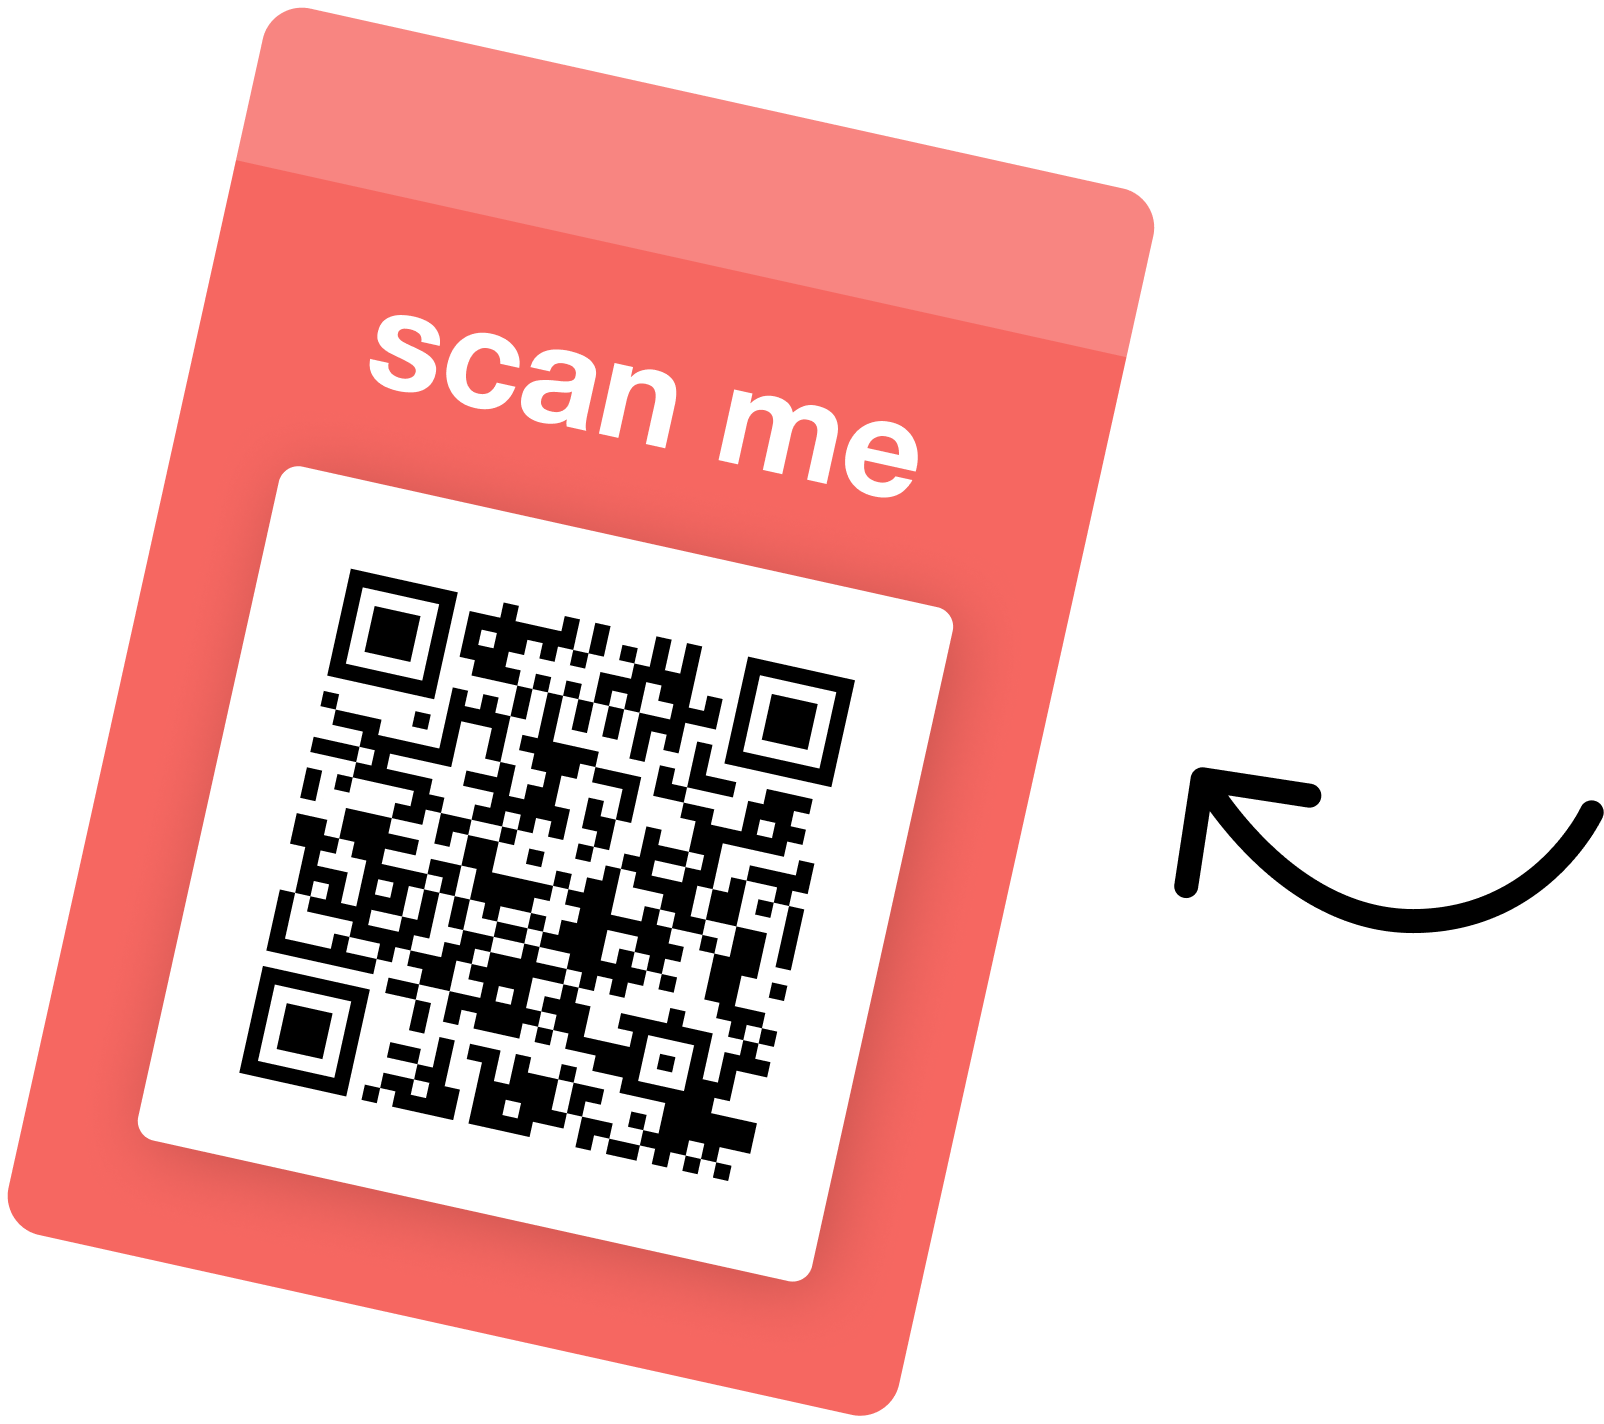 Scan me image for menu demo - with arrow